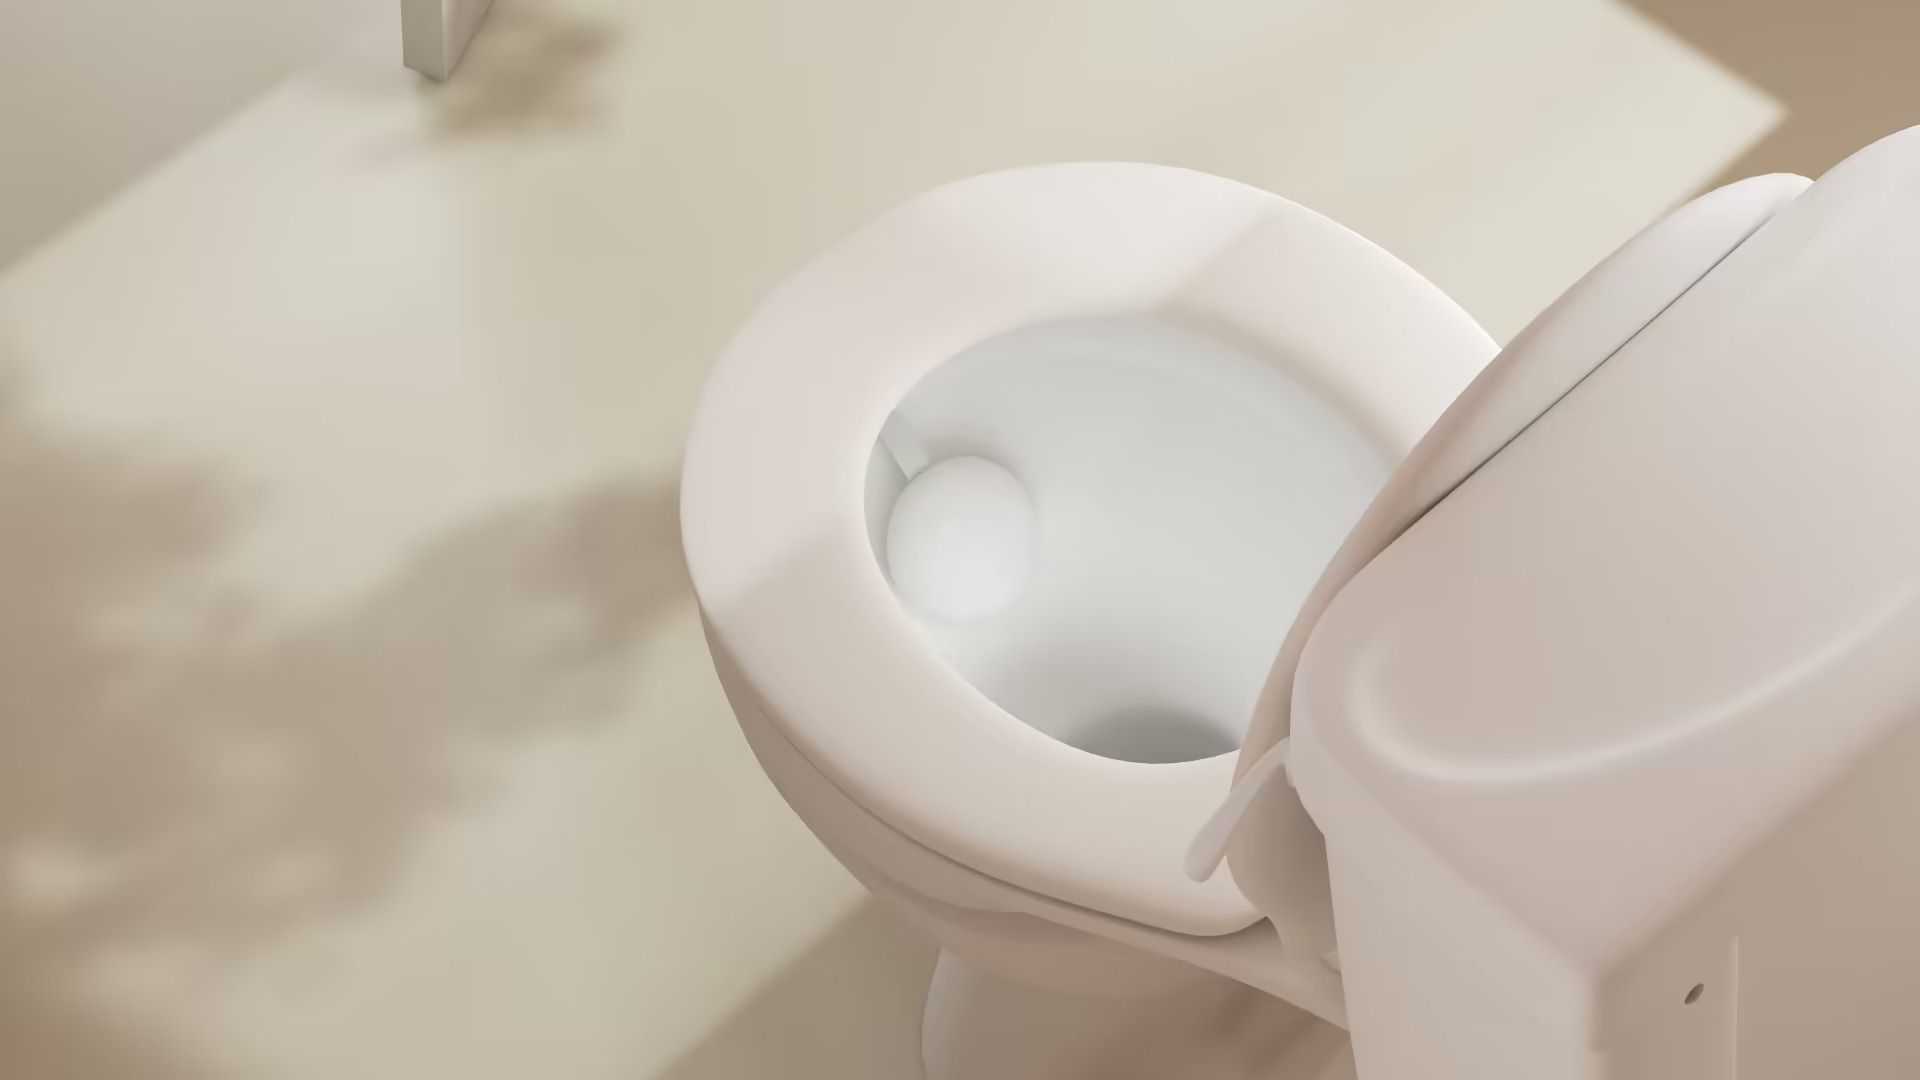 Withings' $500 toilet computer wants to be WebMD for your pee